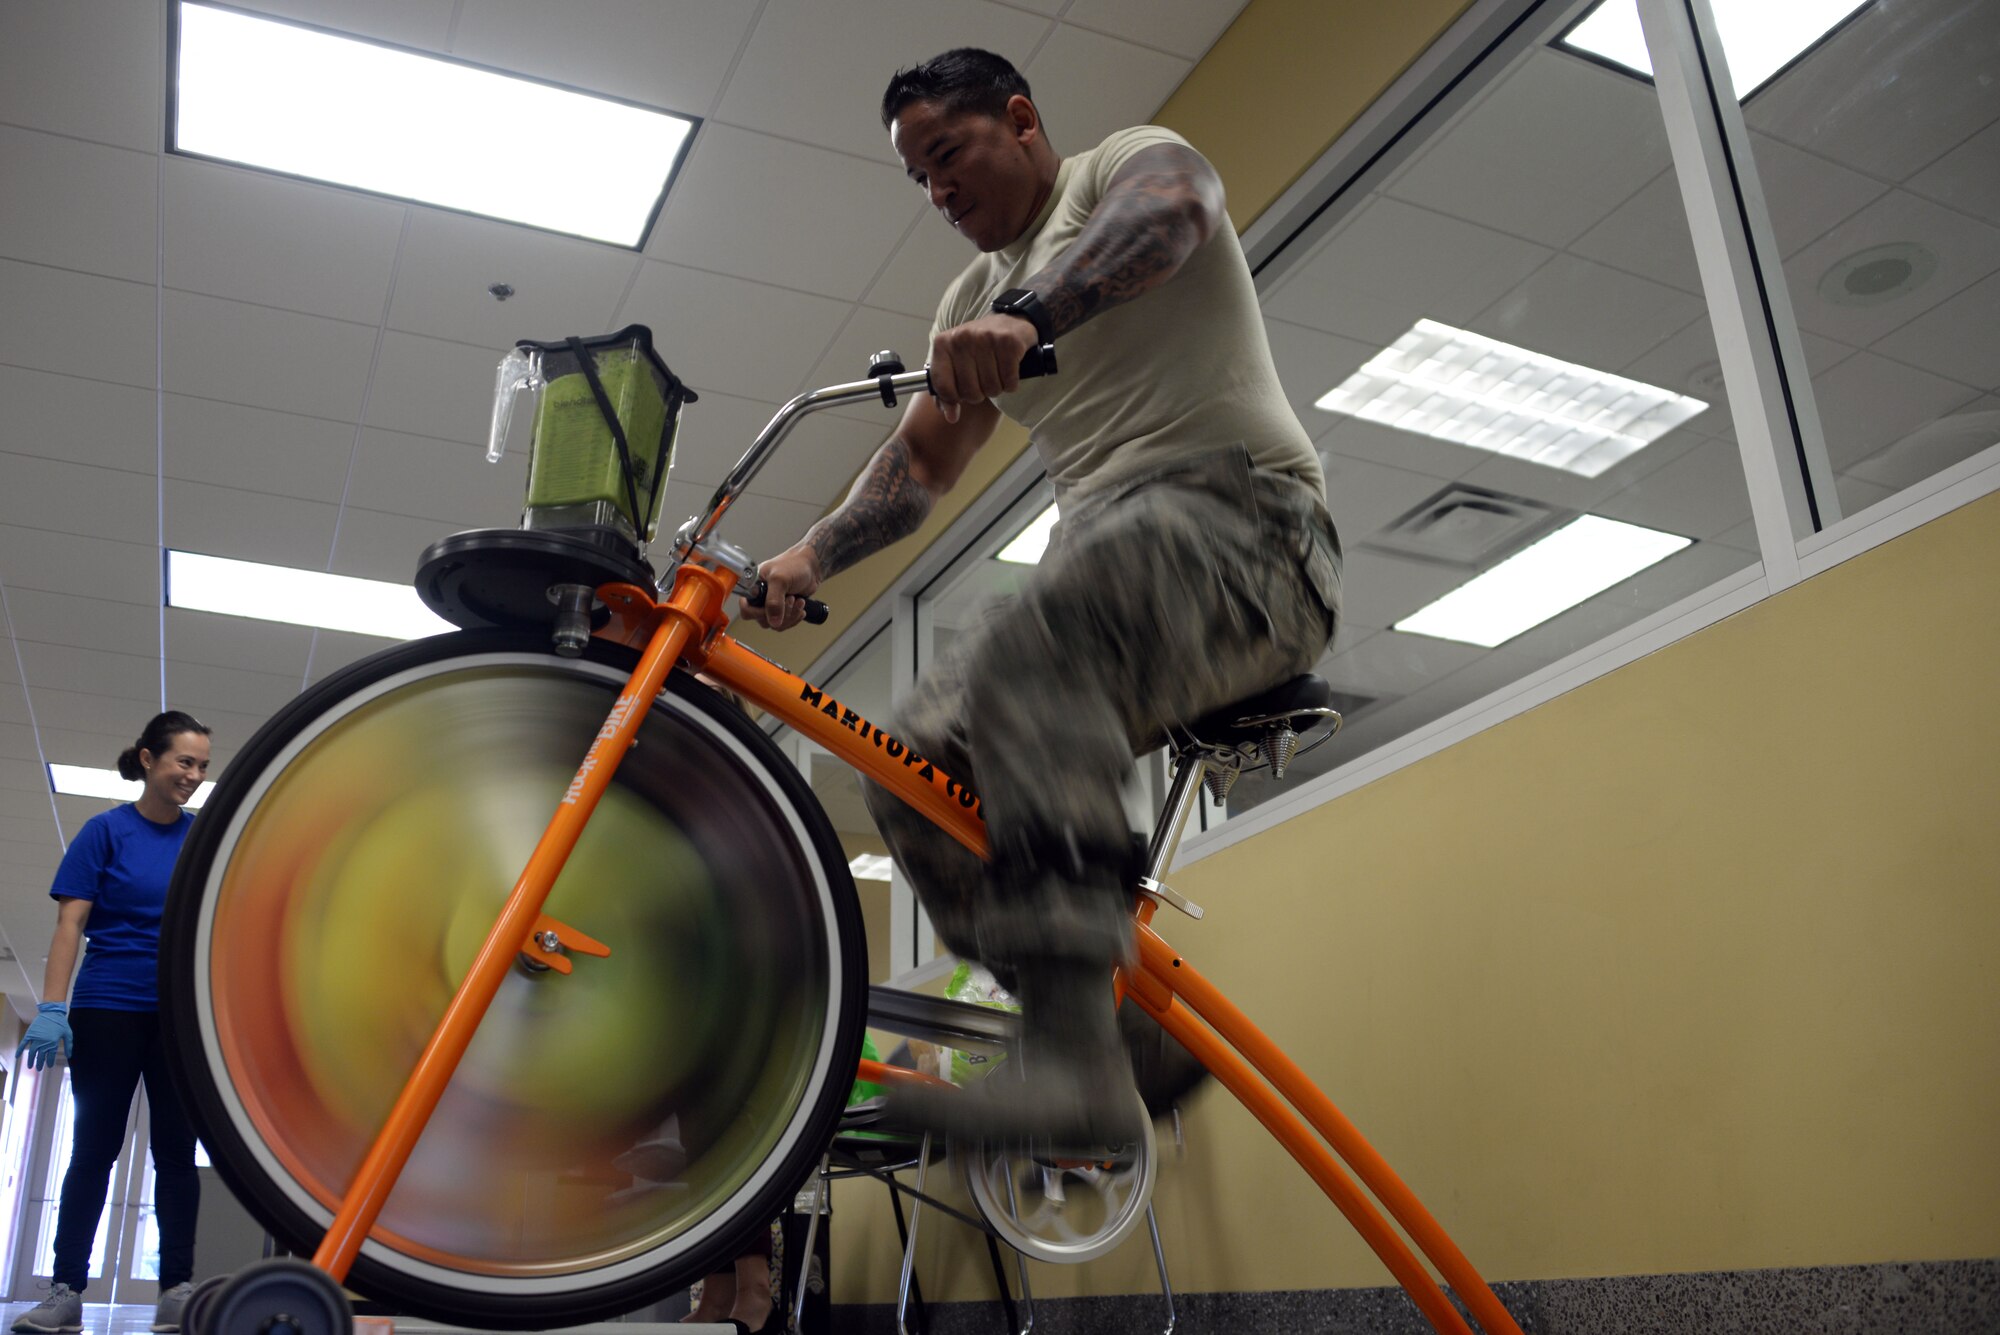 An Airman from the 62nd Aircraft Maintenance Unit powers a blender with a stationary bike during 56th Medical Group health promotion at Luke Air Force Base, Ariz., April 5, 2018. The 56th MDG is celebrating National Nutrition Month, which is themed “Go Further with Food.” The campaign focuses on the importance of making informed food choices and developing sound eating and exercising habits. (U.S. Air Force photo by Senior Airman Devante Williams)